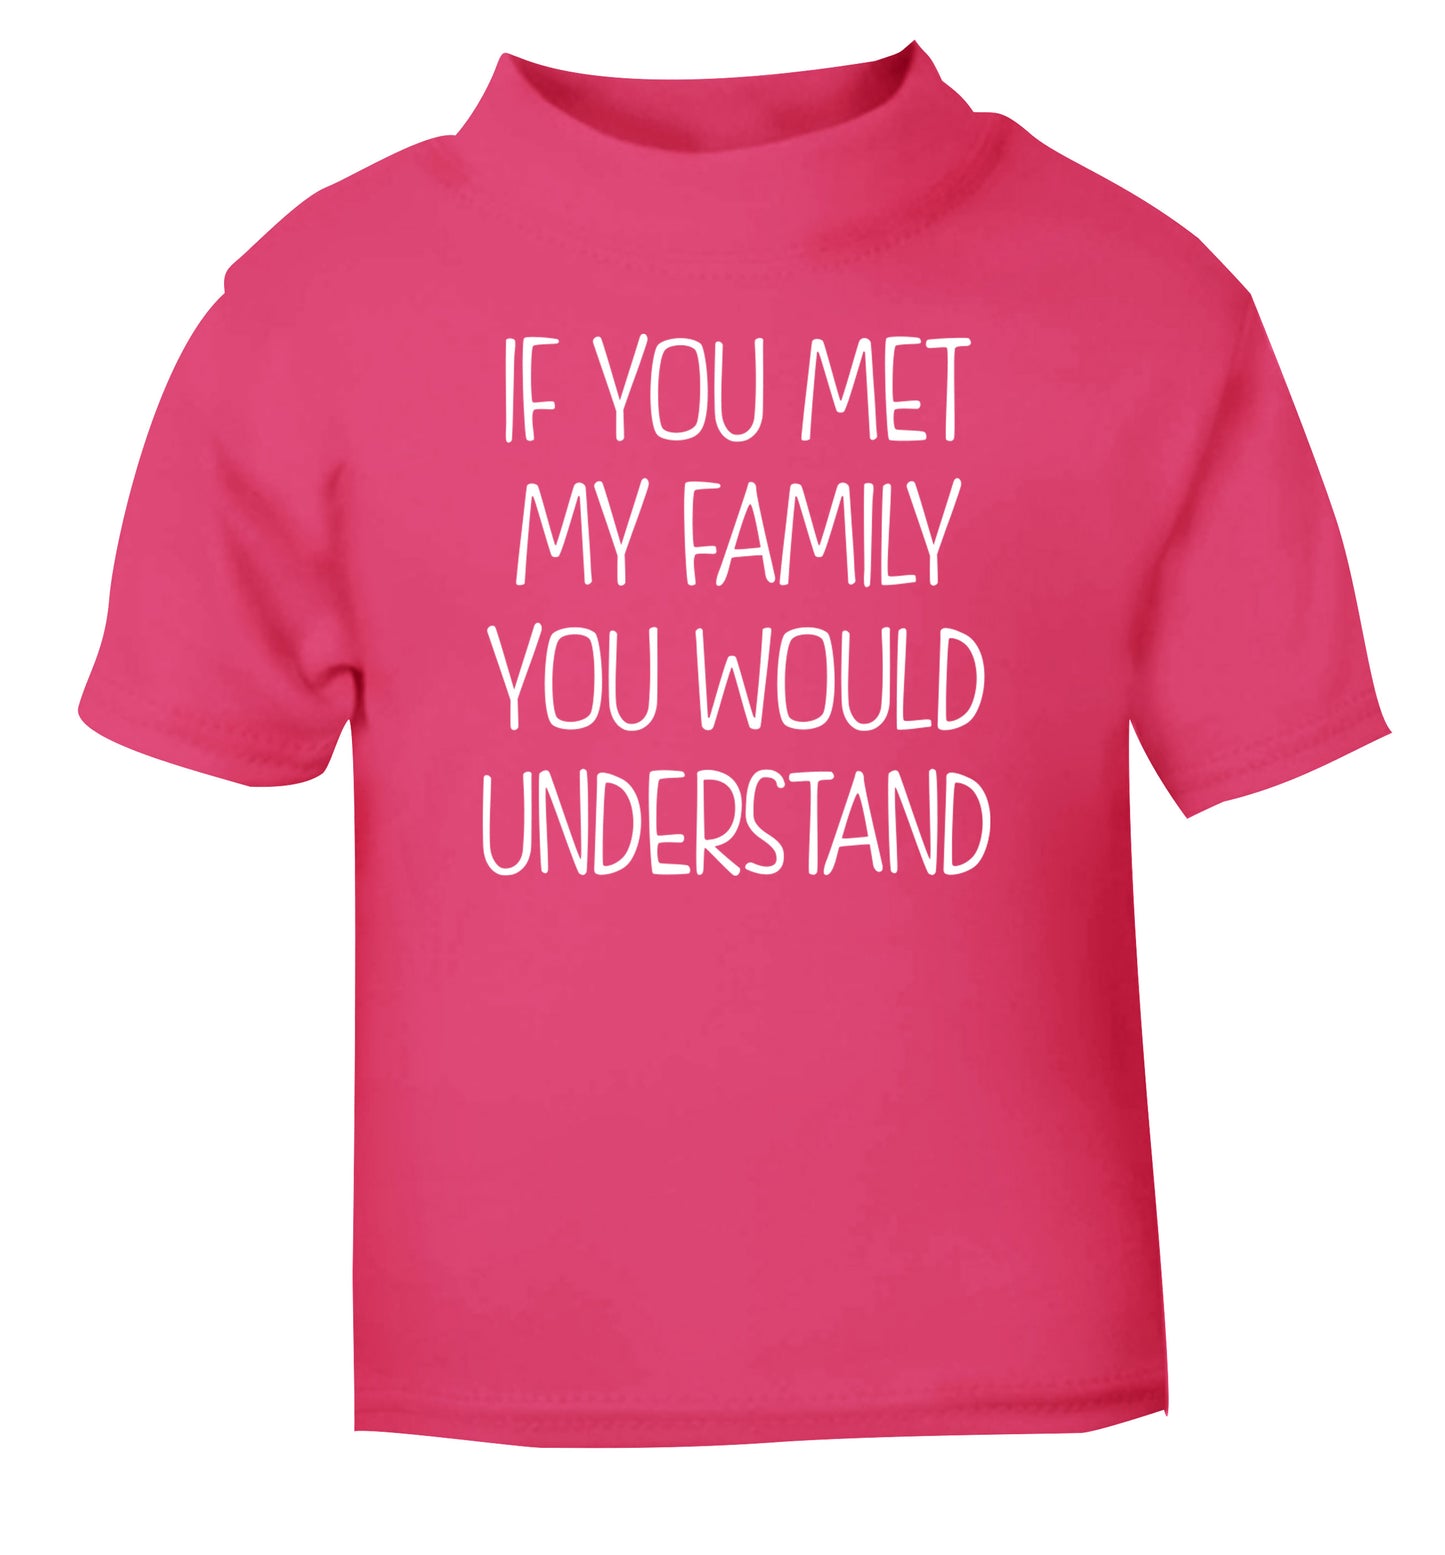 If you met my family you would understand pink Baby Toddler Tshirt 2 Years